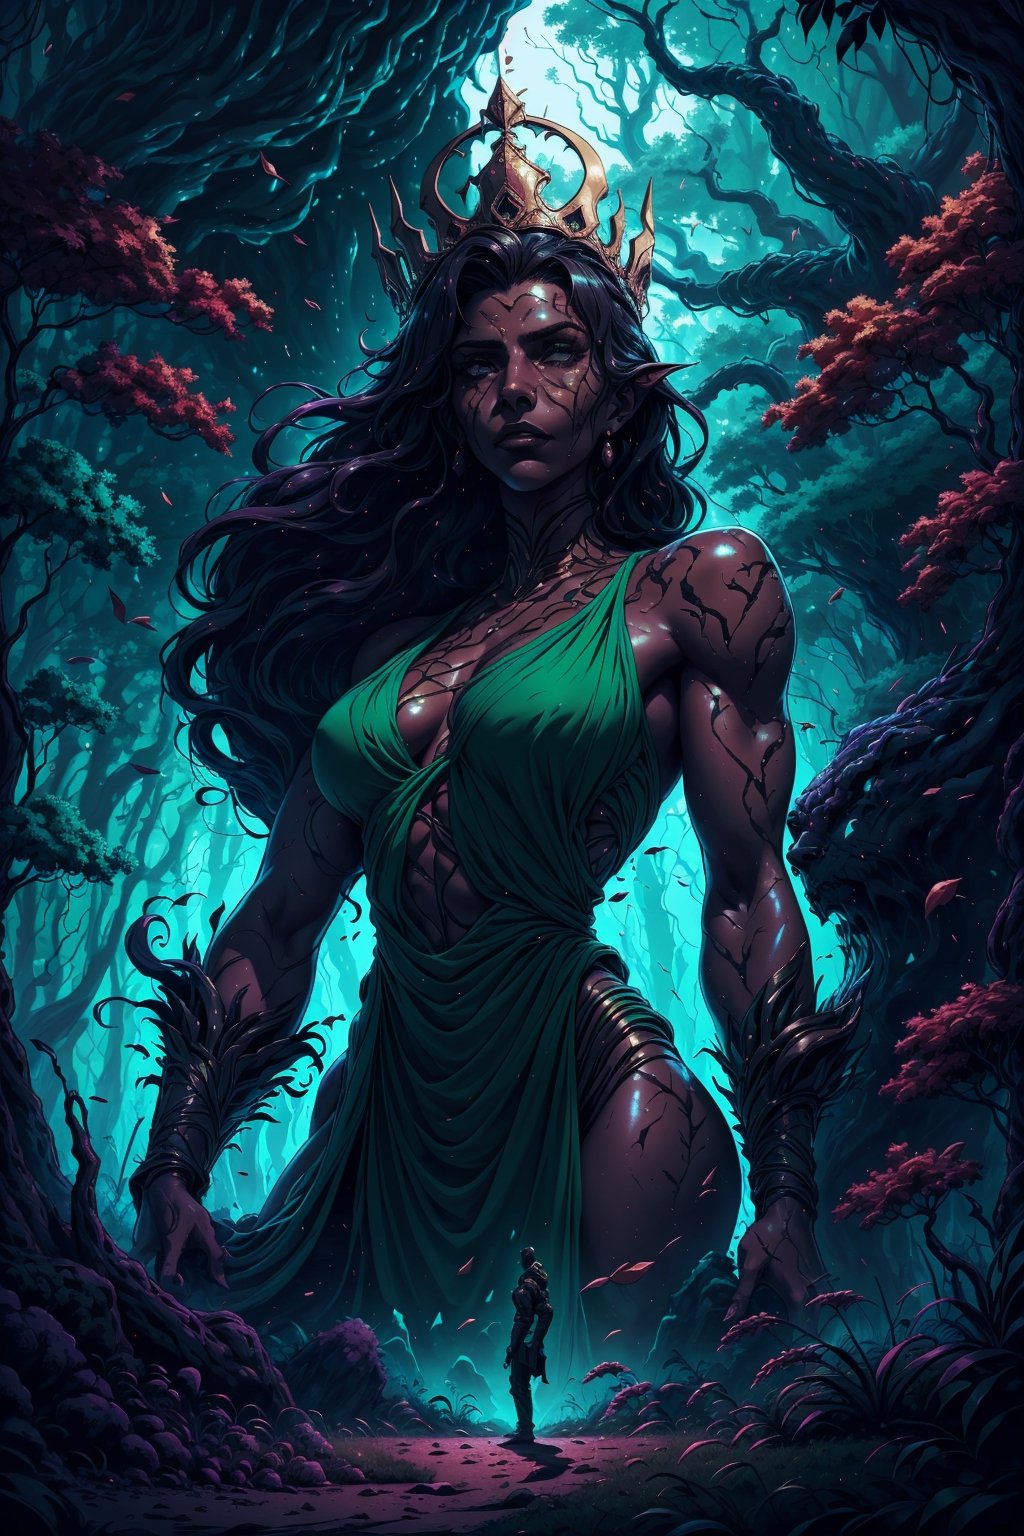 a scene where a tall and athletic dark skin man ( god of the forrest) , rising from the ground at an imposing height, flowing hair, magnificent crown,  encounters a young man significantly shorter than her. background theme is the dark forrest,  beautiful green and and gold tones, Explore the dynamics of their interaction, capturing the contrasts in physicality and perhaps delving into the unexpected connection or conflict that arises between the two characters. Consider how their respective statures influence their dialogue, body language, and the overall atmosphere of the encounter, 8k, interactive image, highly detailed, .,sciamano240,fantasy00d